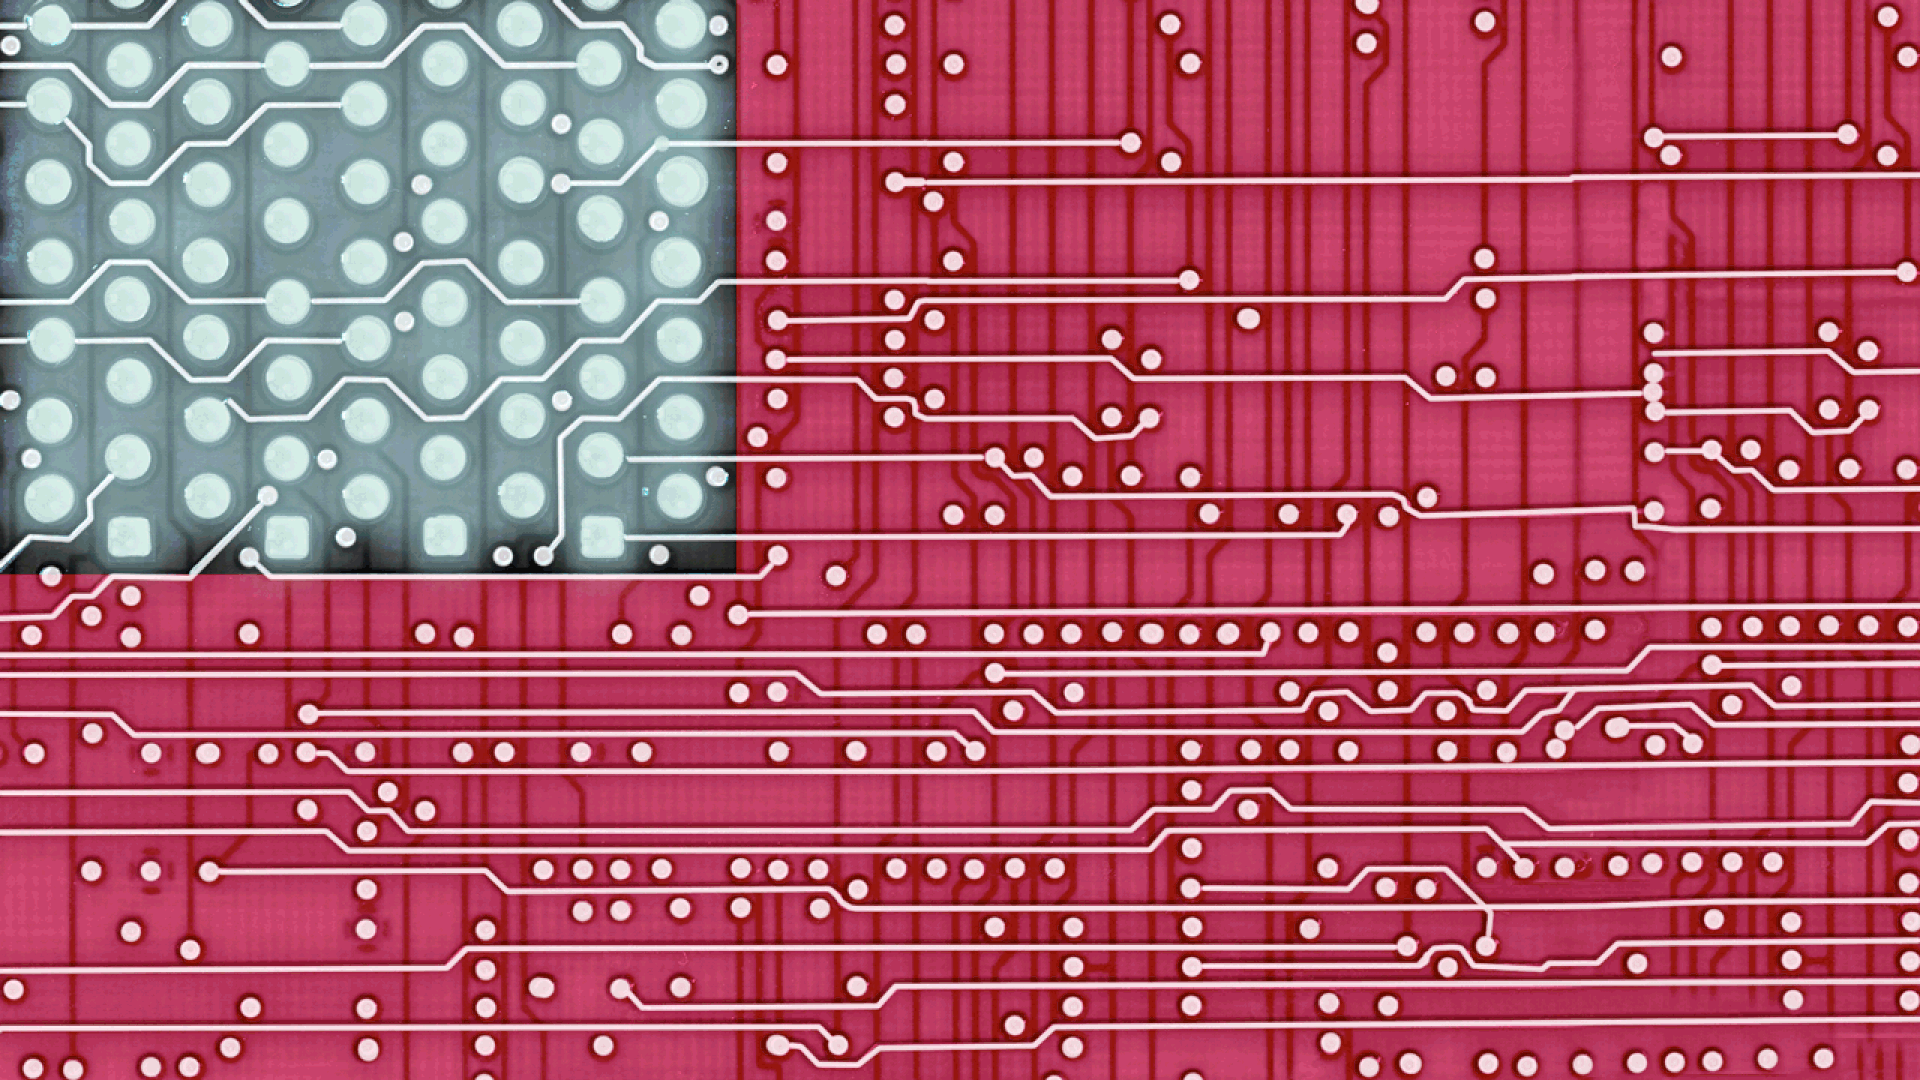 Animated illustration of a circuit board in the shape of an American flag lighting up and then shutting down